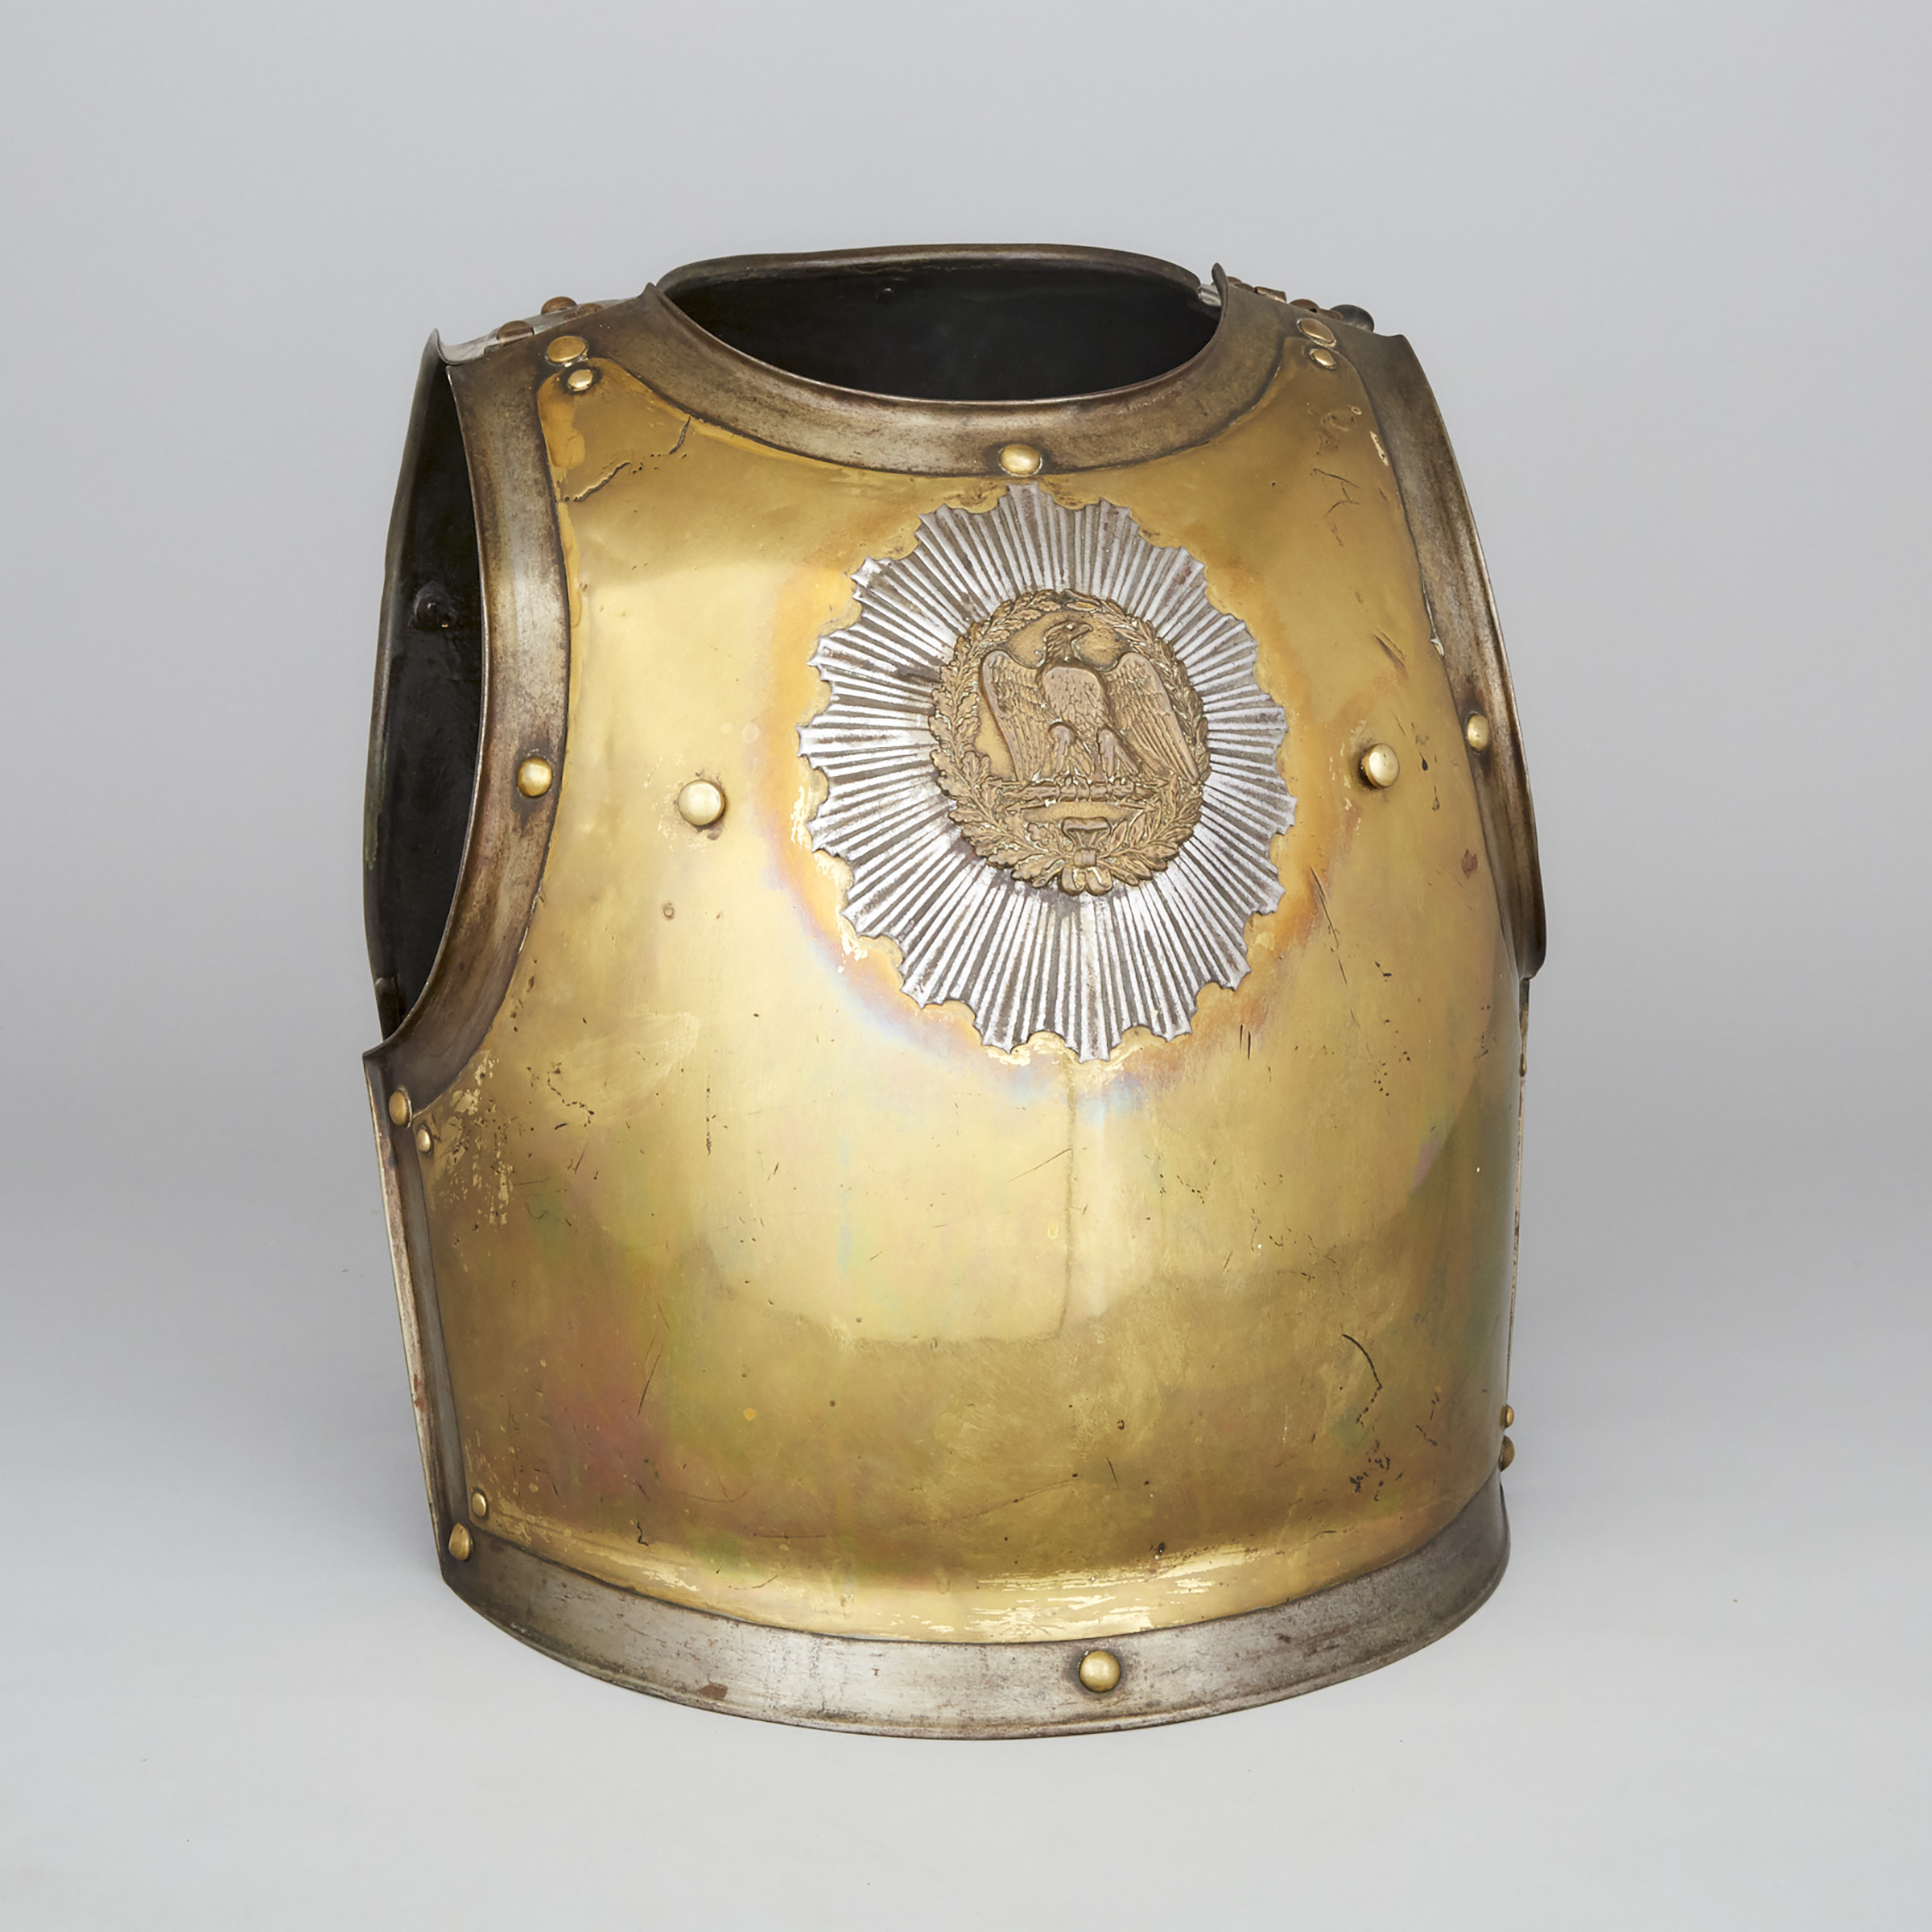 French Carabinier-a-Cheval Officer's Cuirass, Klingenthal Armory, 1832